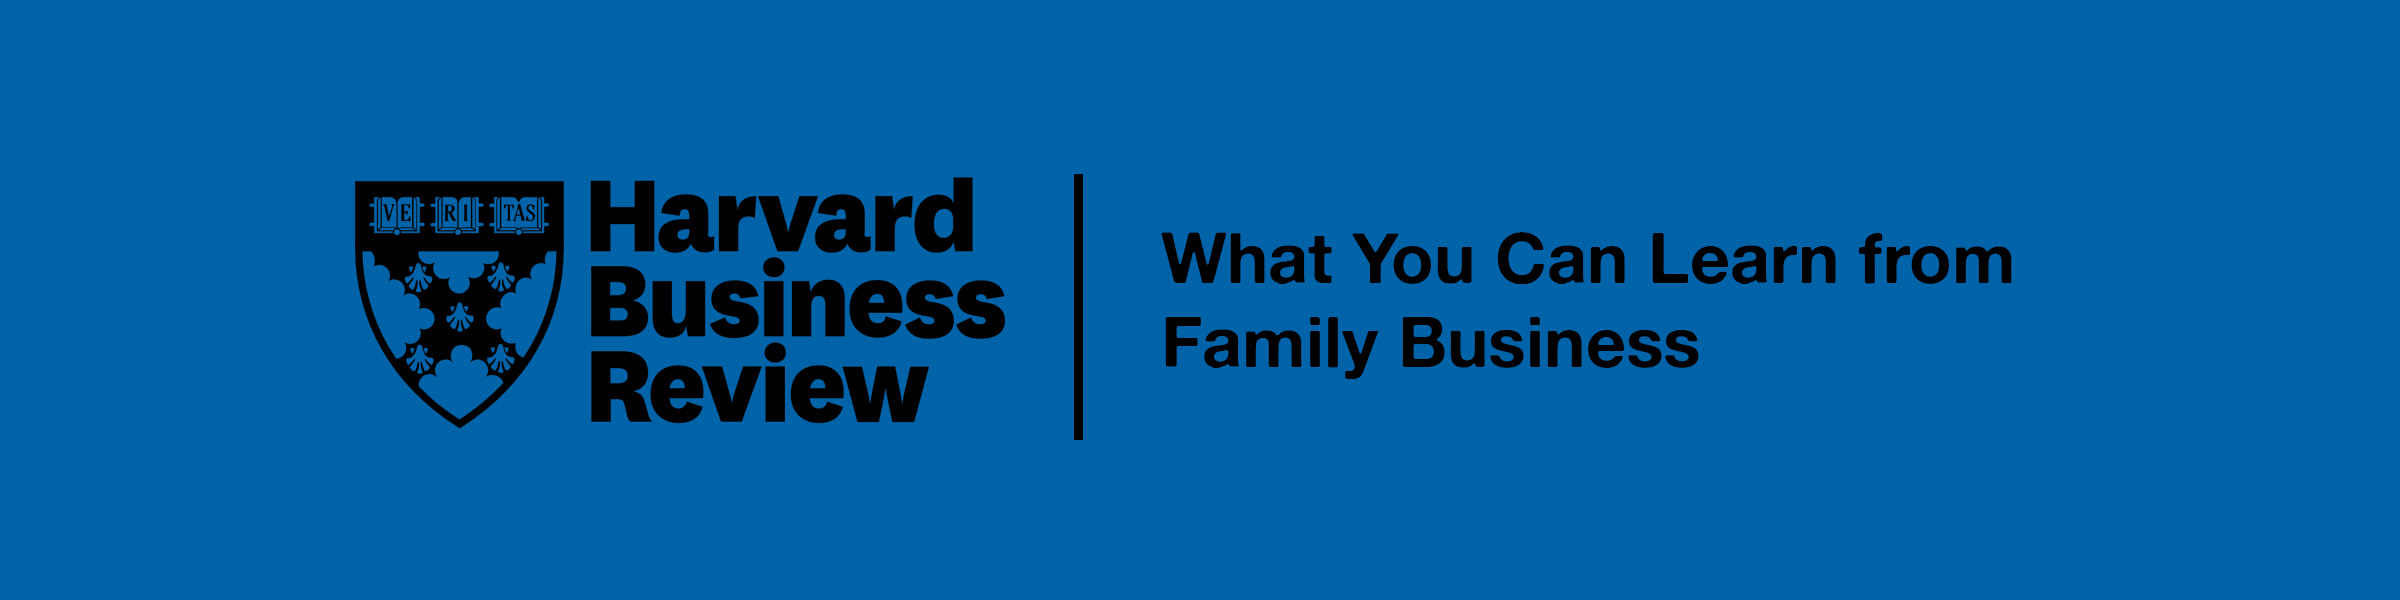 What You Can Learn from Family Business